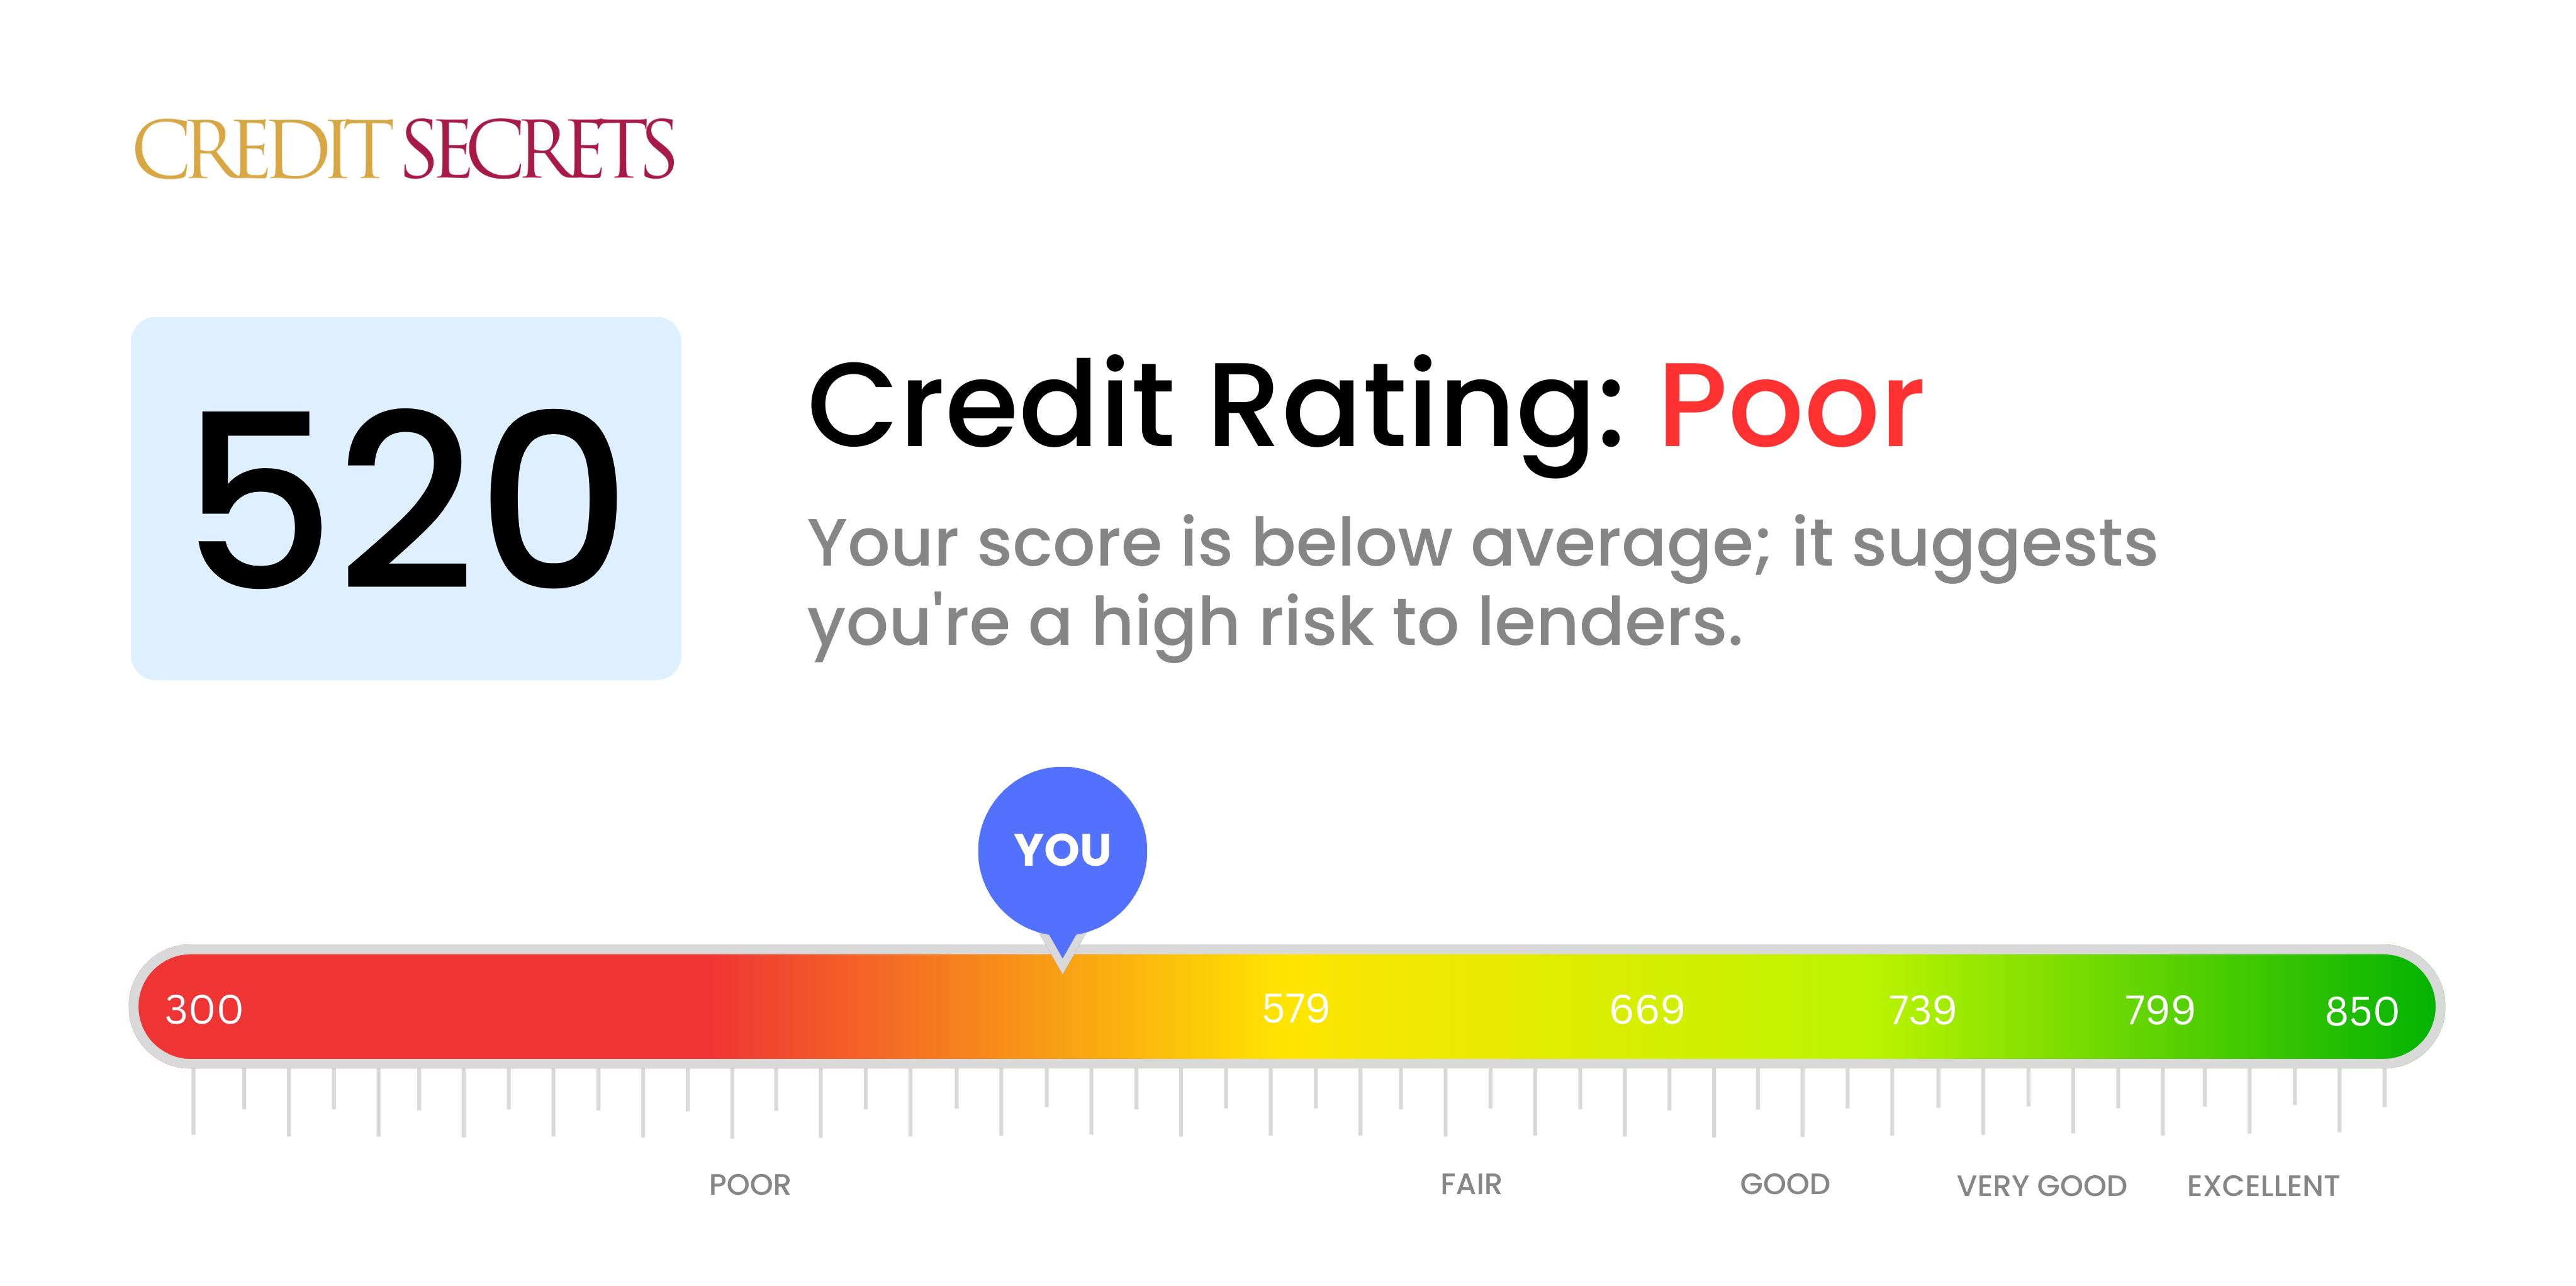 Is 520 a good credit score?